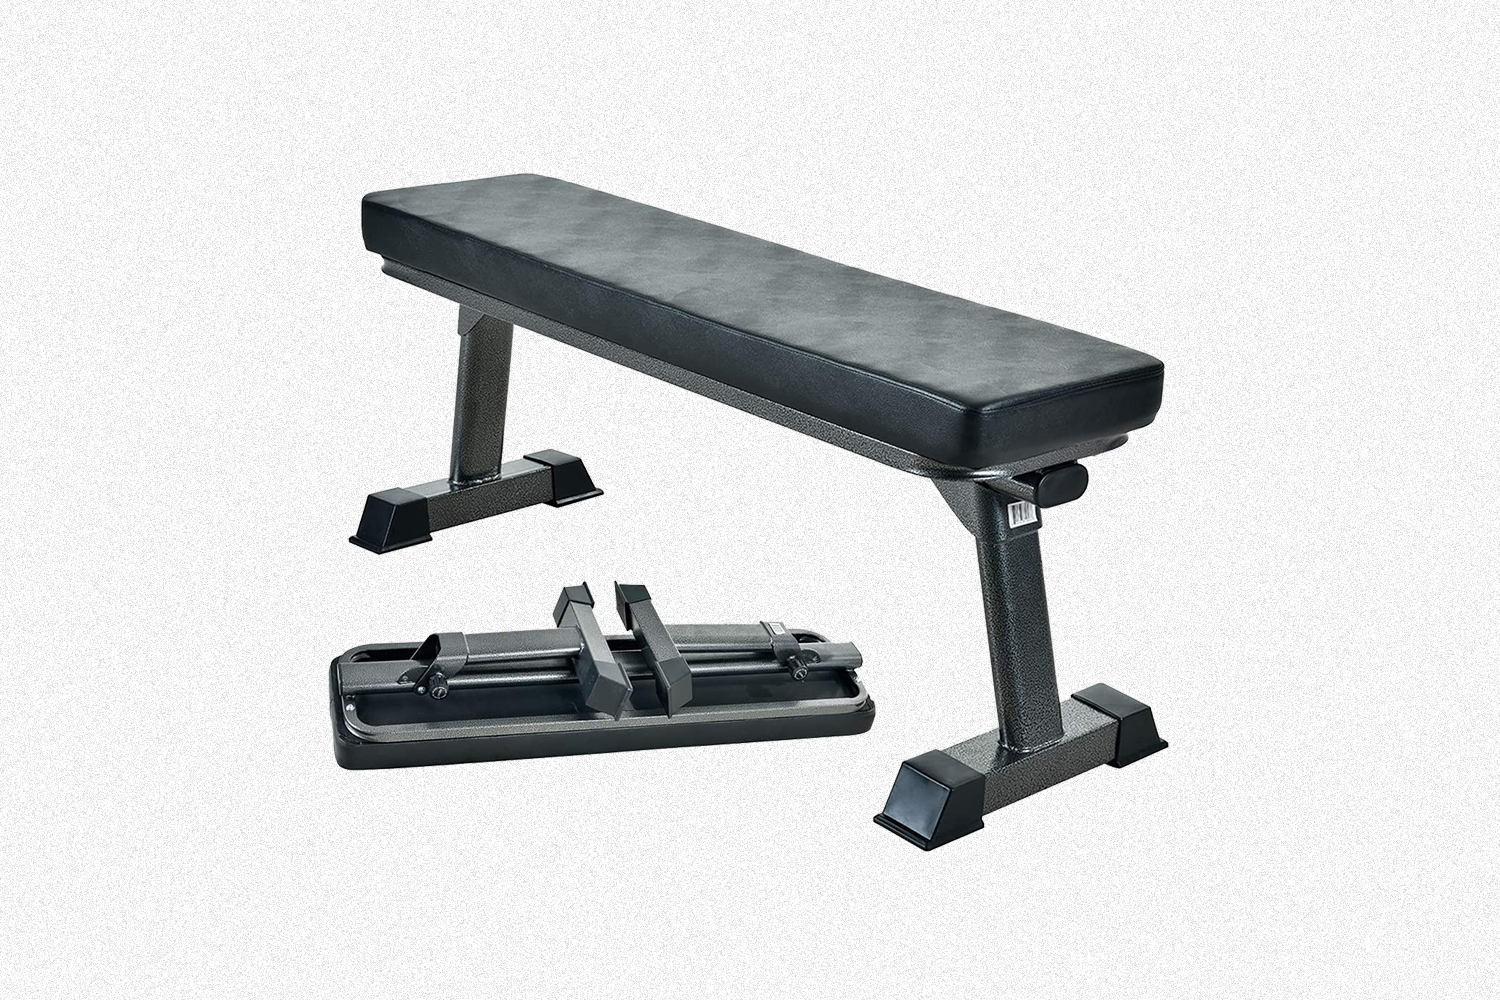 Grab A Discount On Finer Forms Workout Bench On Amazon Insidehook